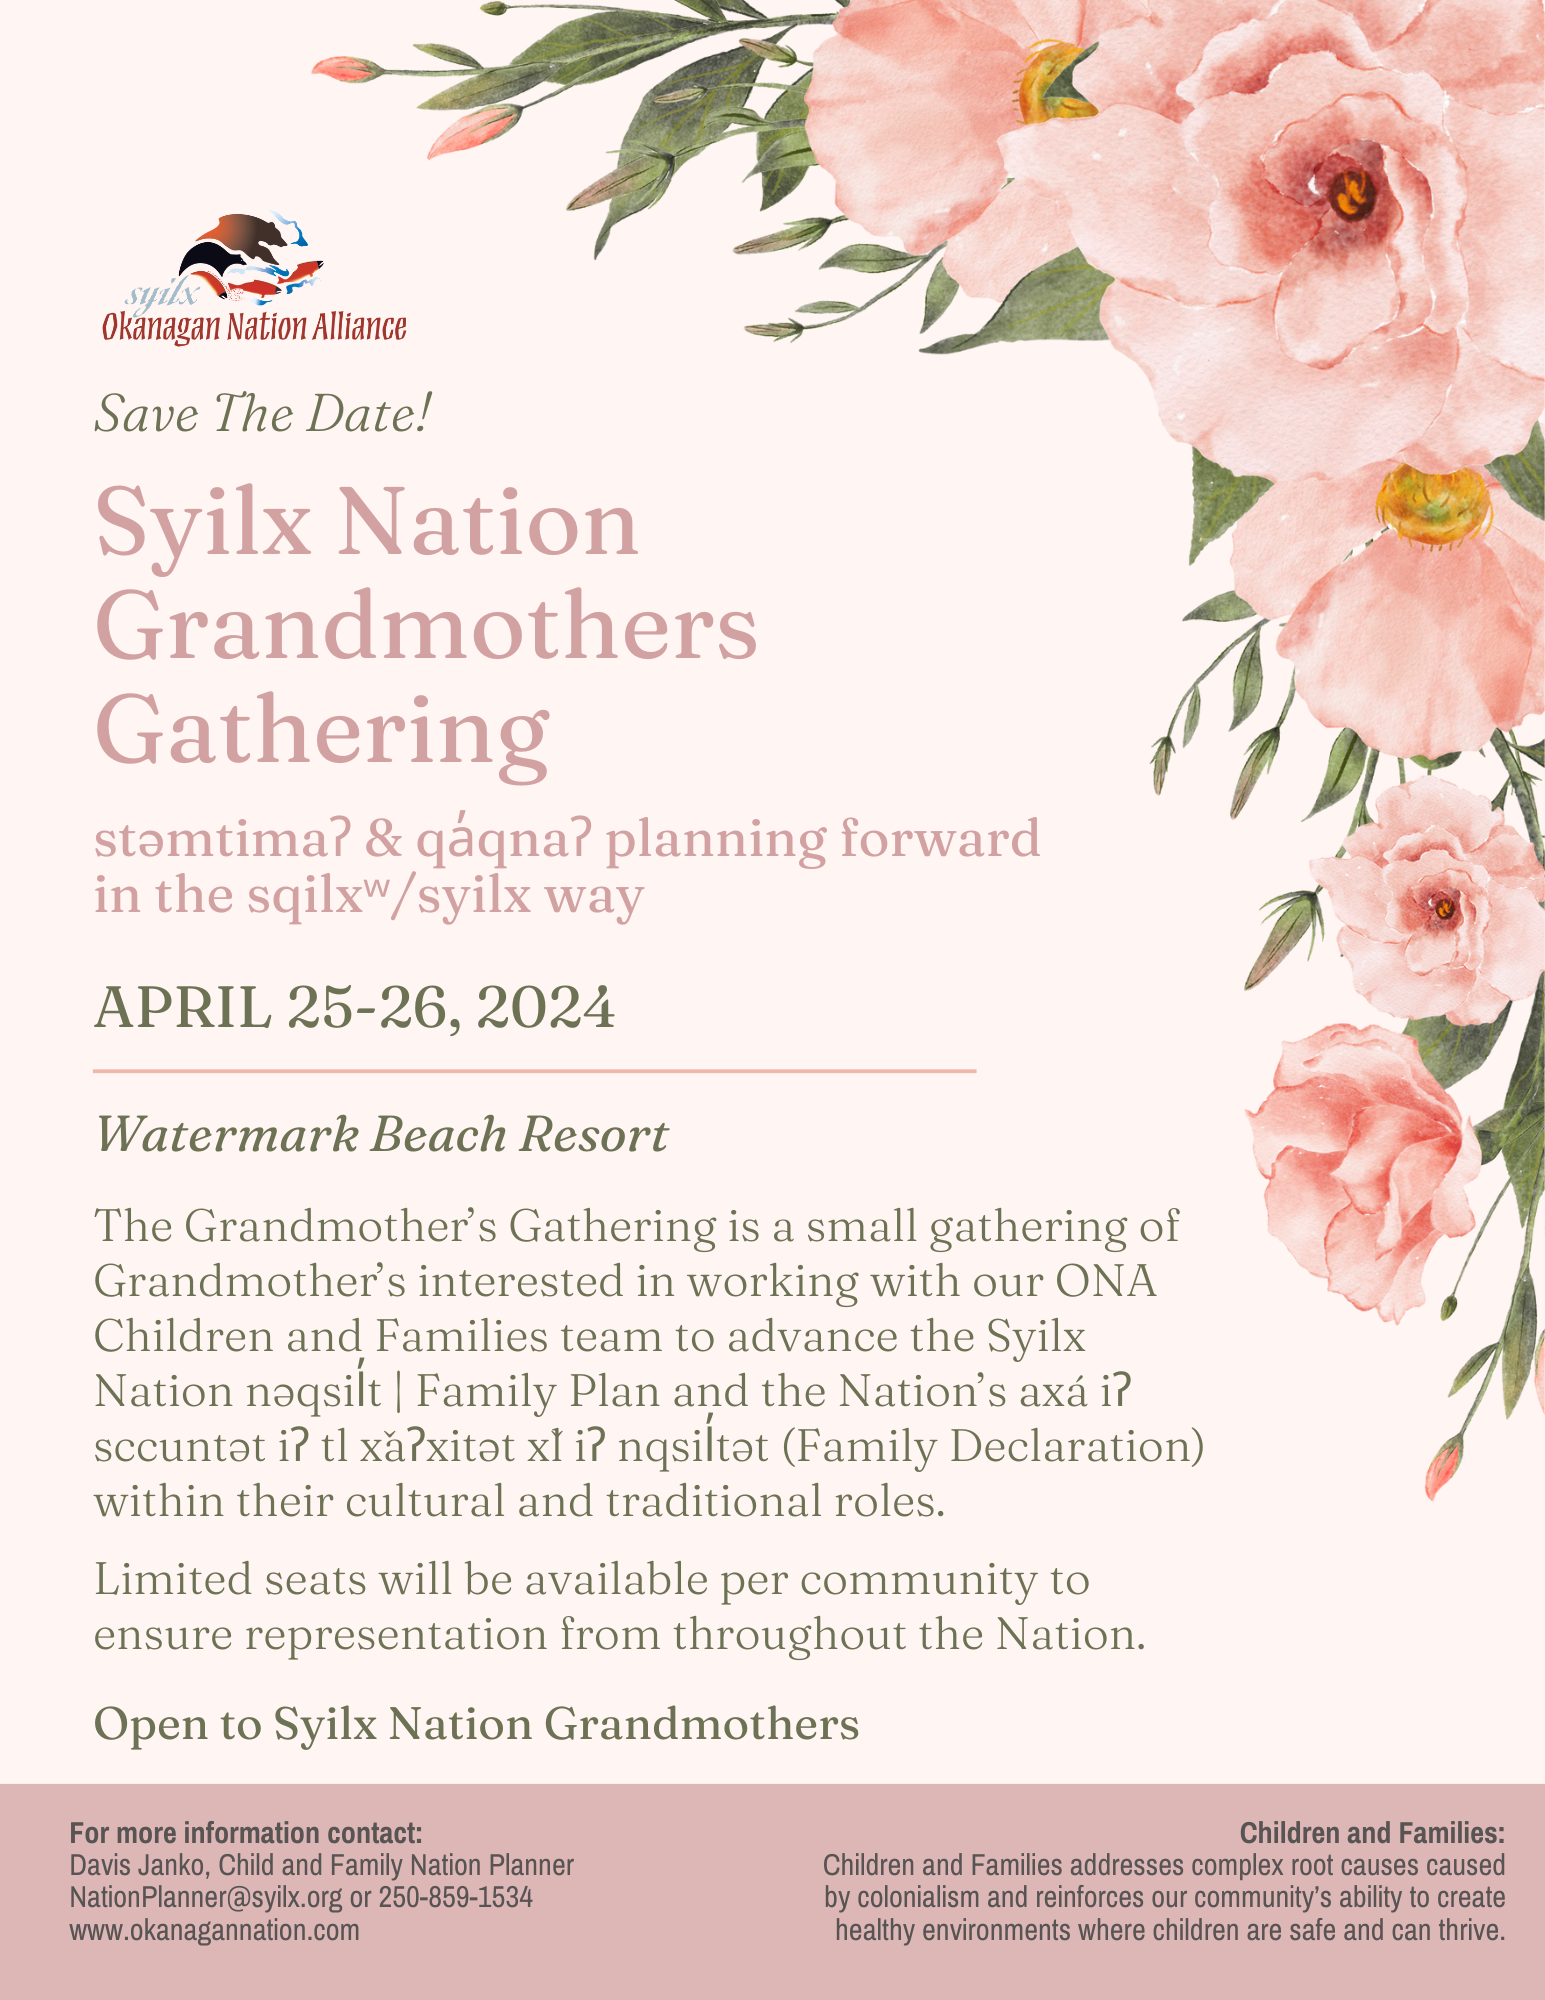 Save the date: Syilx Nation Grandmothers Gathering